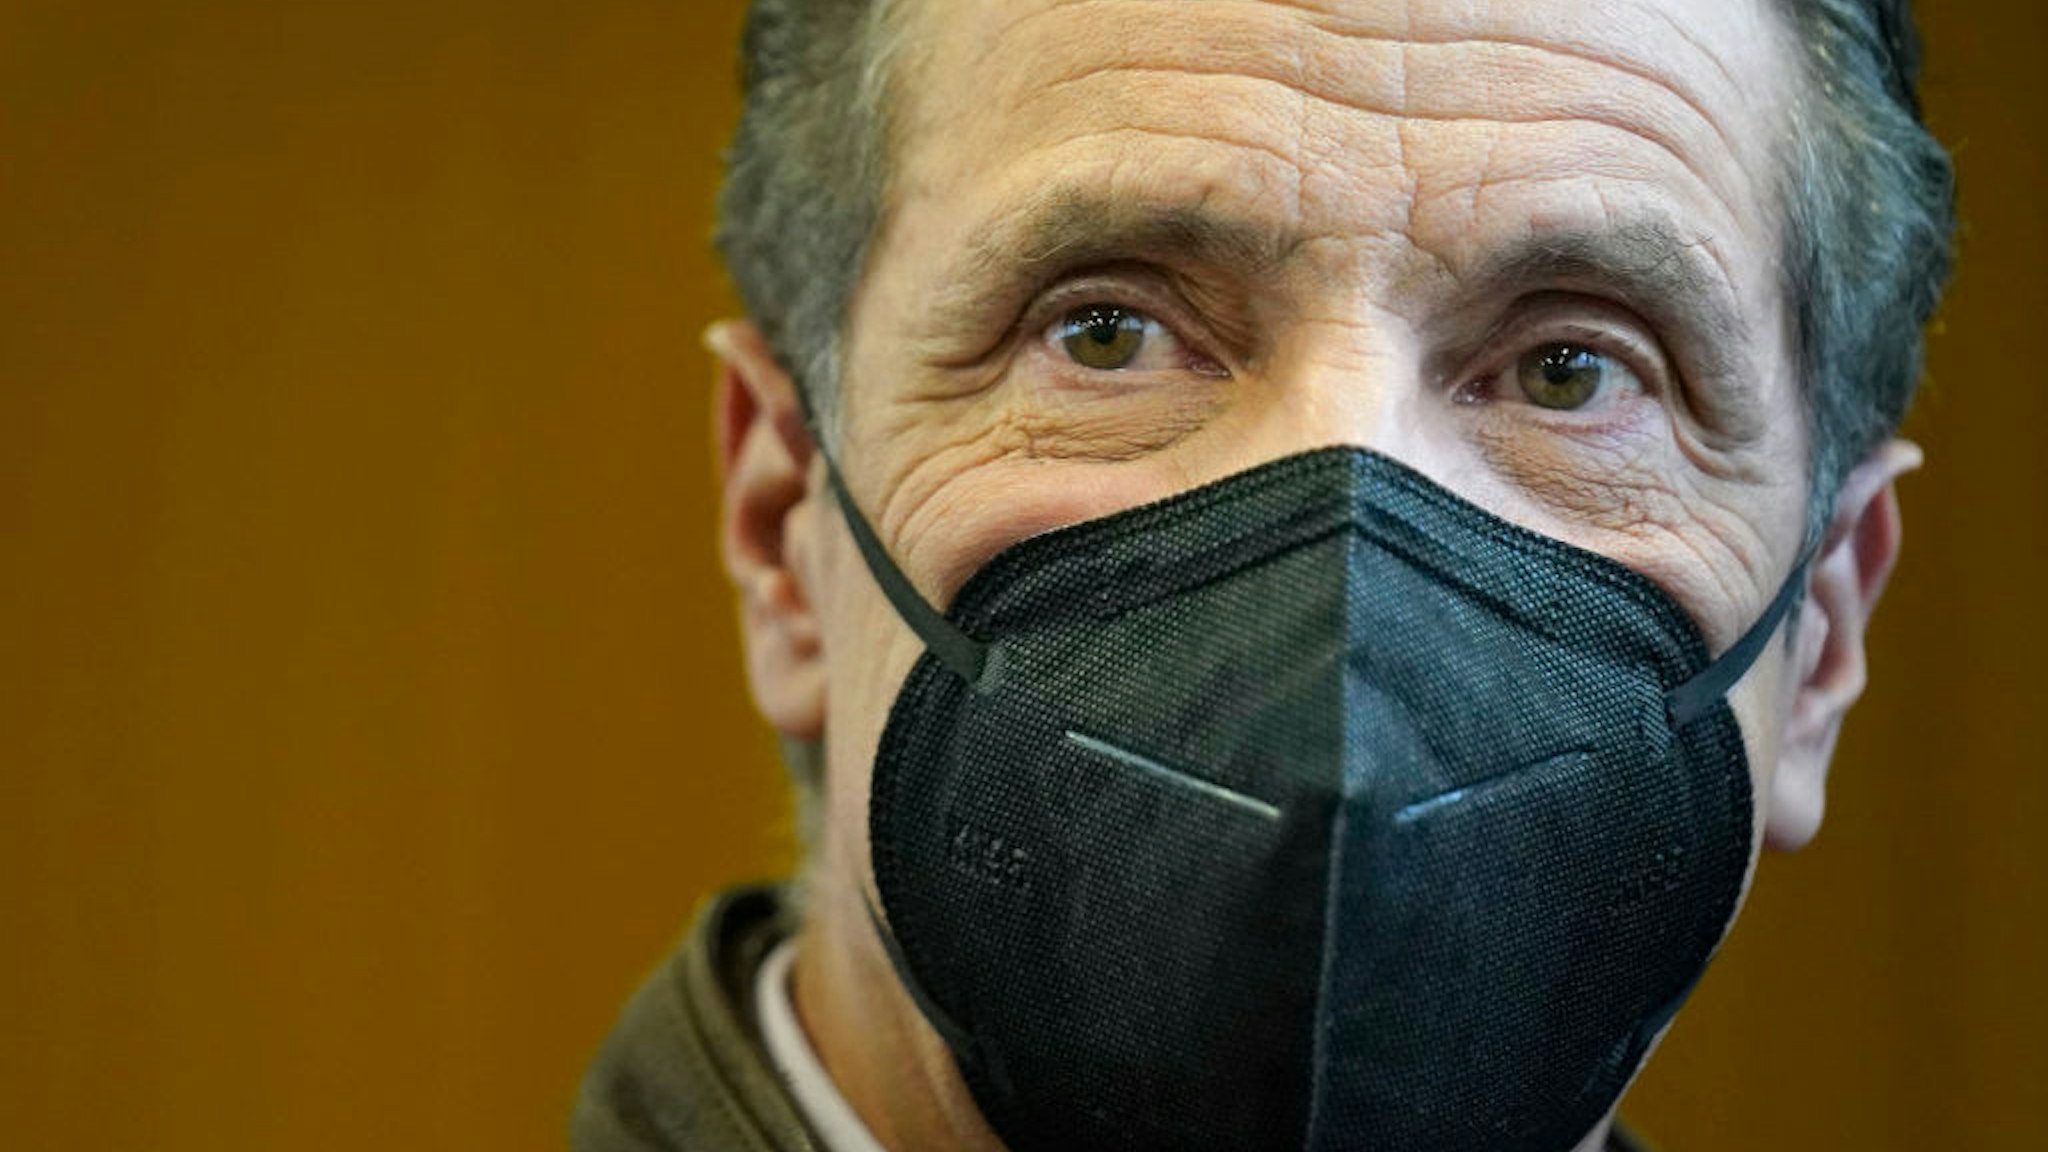 New York Governor Andrew Cuomo walks through a vaccination site after speaking in the Brooklyn borough of New York, on February 22, 2021. (Photo by Seth WENIG / POOL / AFP) (Photo by SETH WENIG/POOL/AFP via Getty Images)